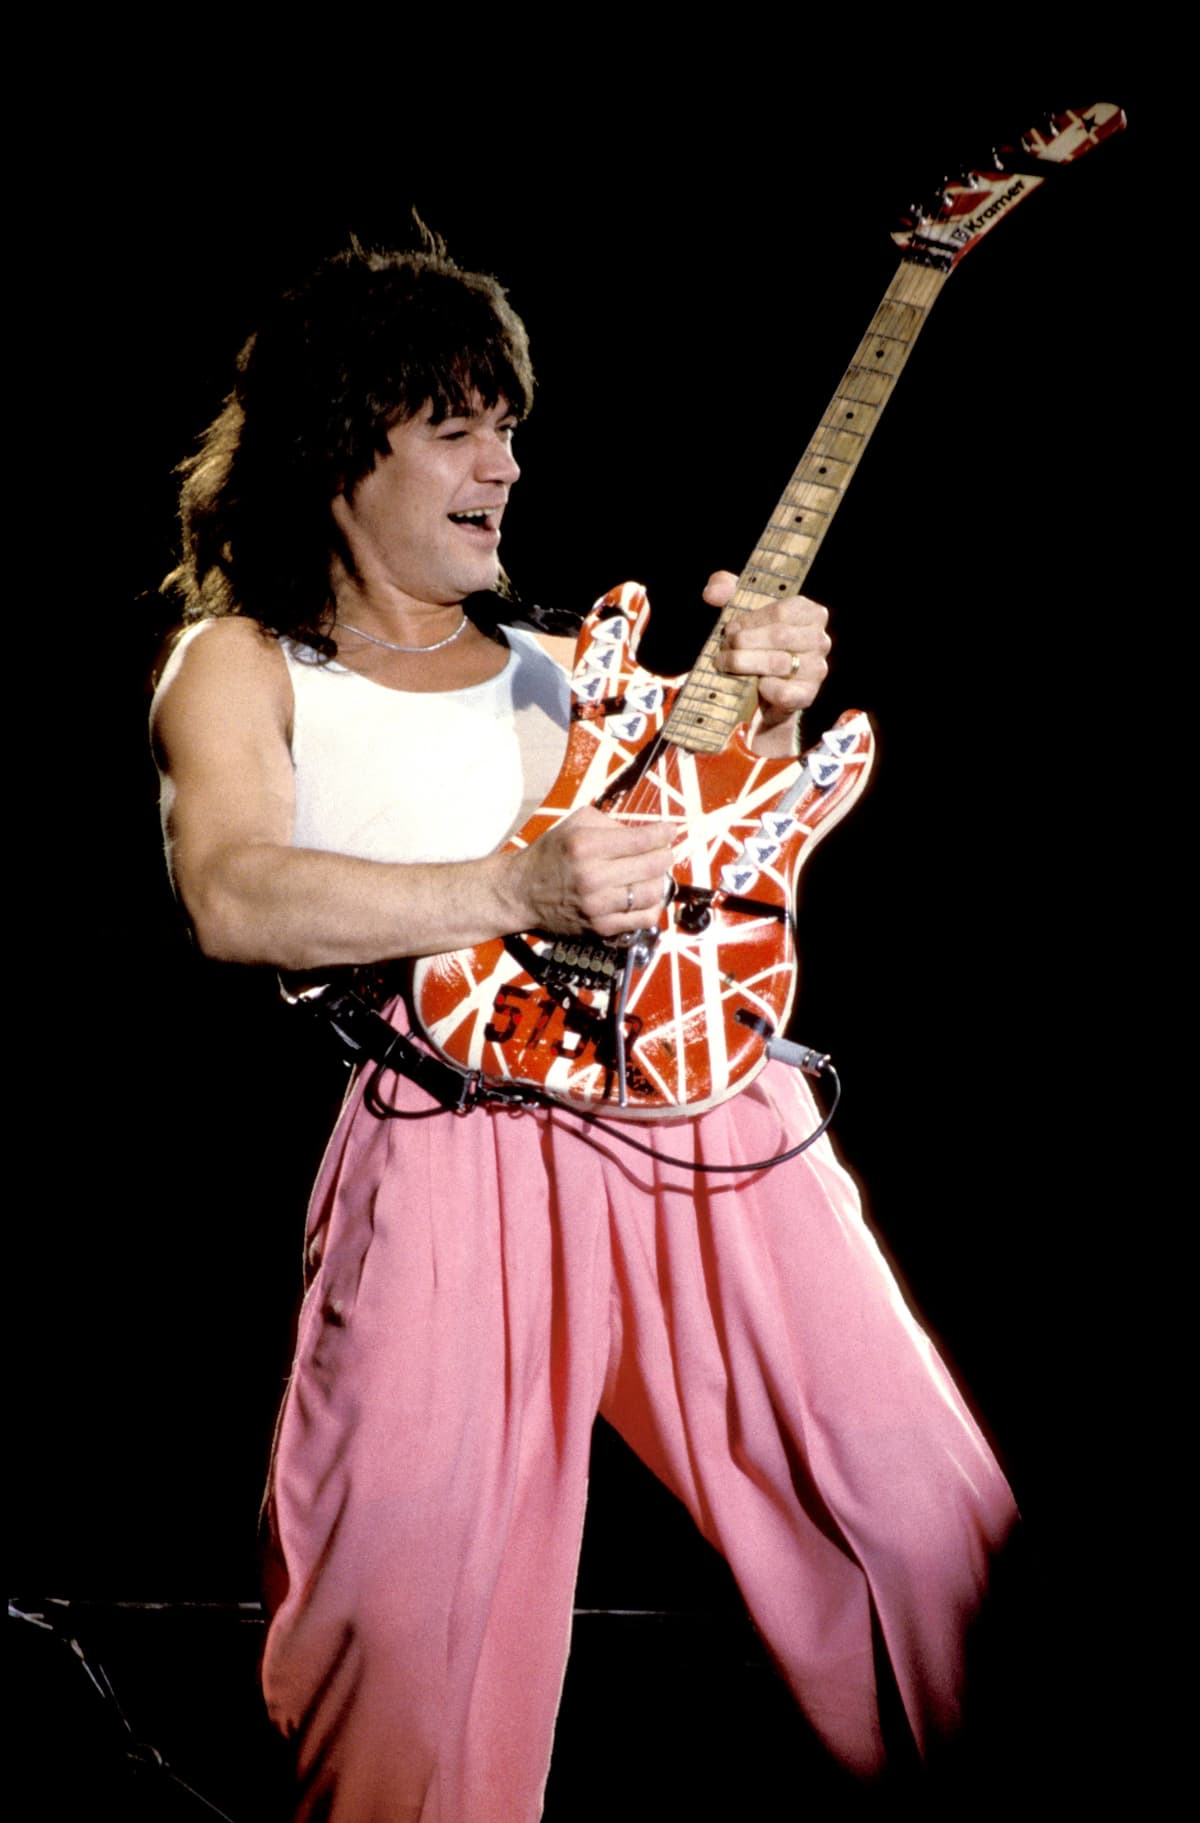 UNITED KINGDOM - OCTOBER 22:  RAINBOW THEATRE  Photo of VAN HALEN and Eddie VAN HALEN, Eddie Van Halen performing live onstage  (Photo by Fin Costello/Redferns)